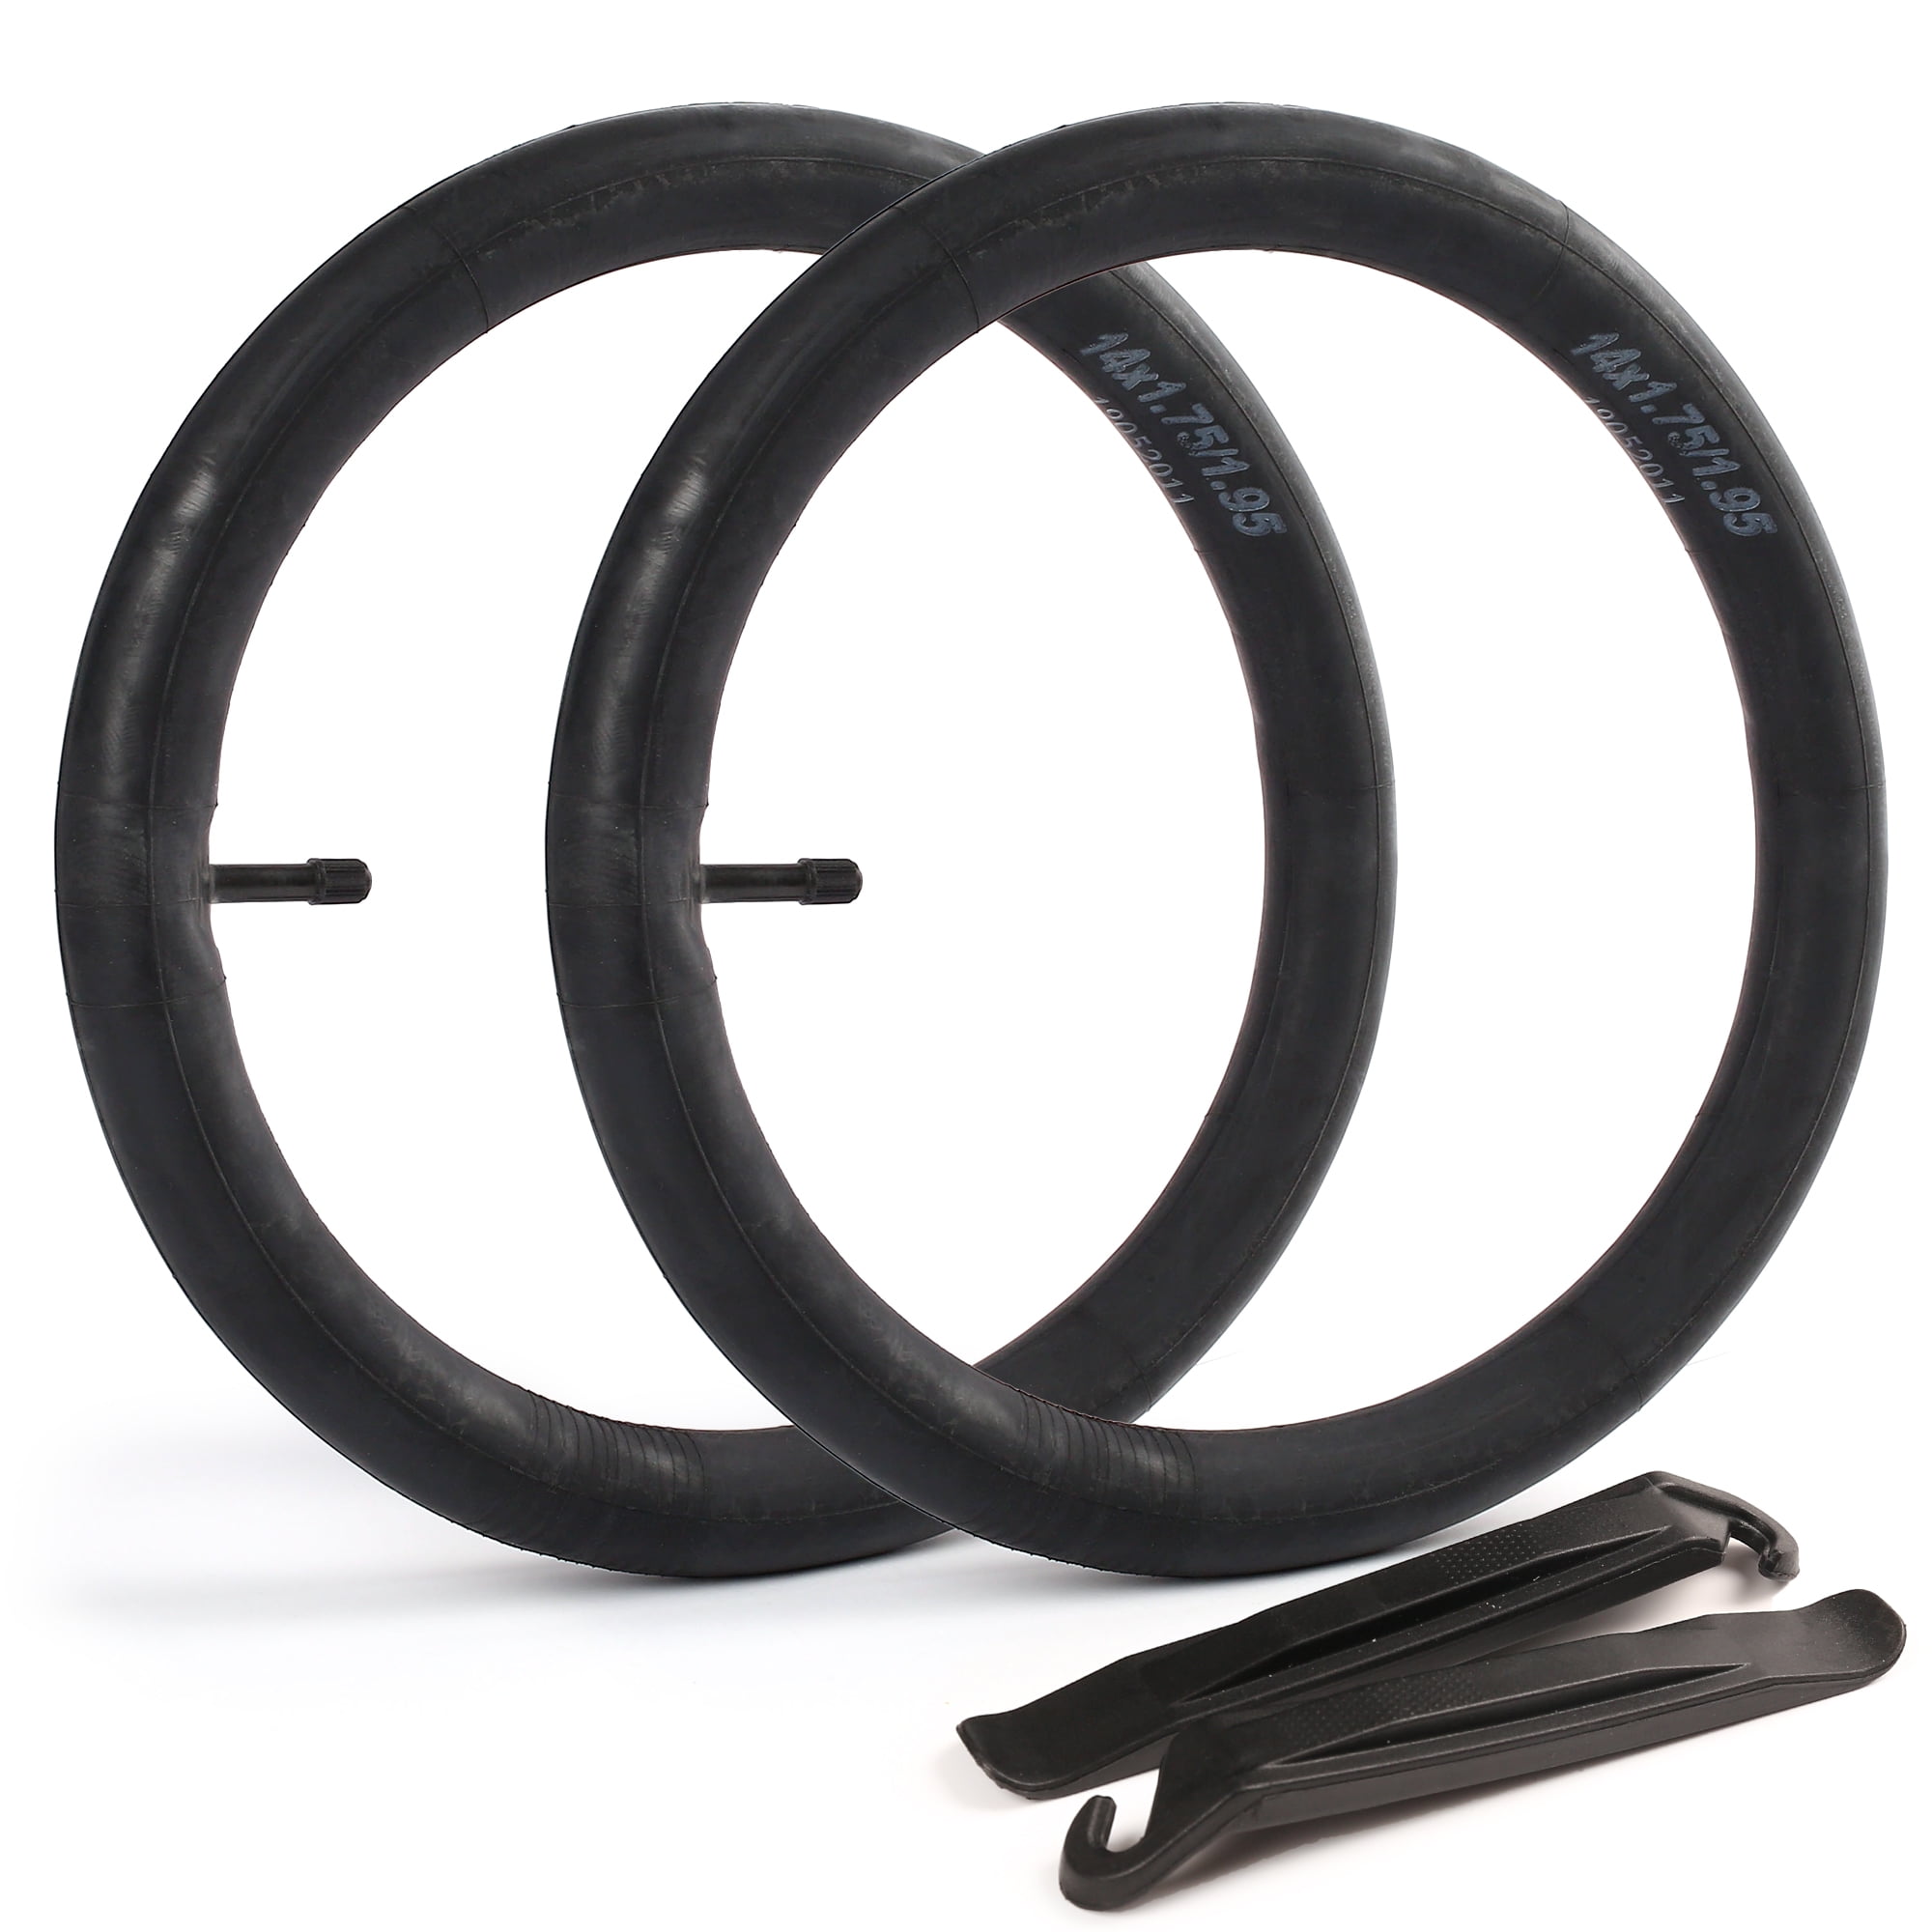 -CLEARANCE  BARGAIN TOP  QUALITY INNER TUBES FITS  14 x 1.75 CHILDS BIKE SIZES 